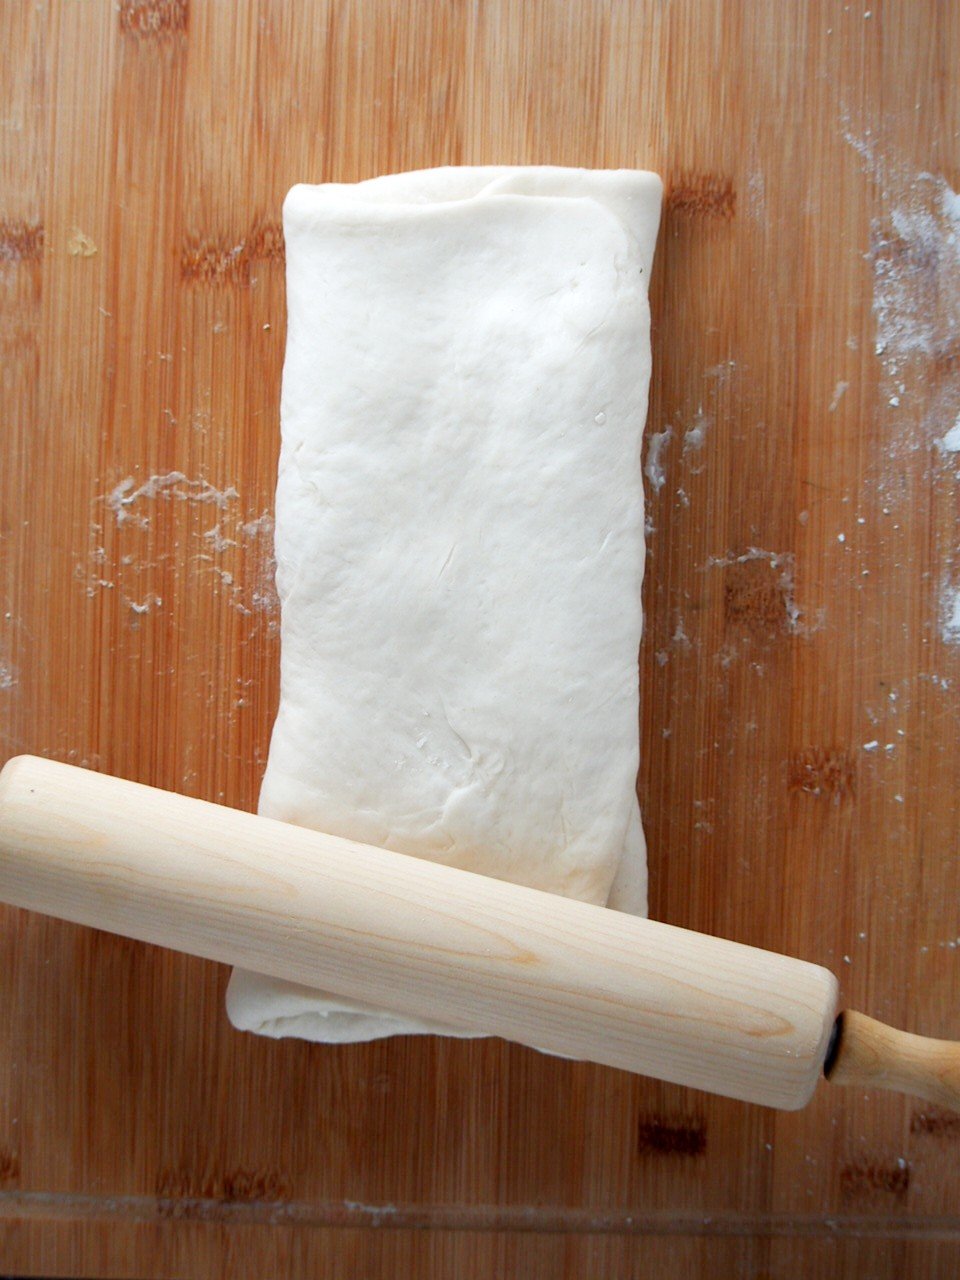 Rolling the bread dough into a rectangle.